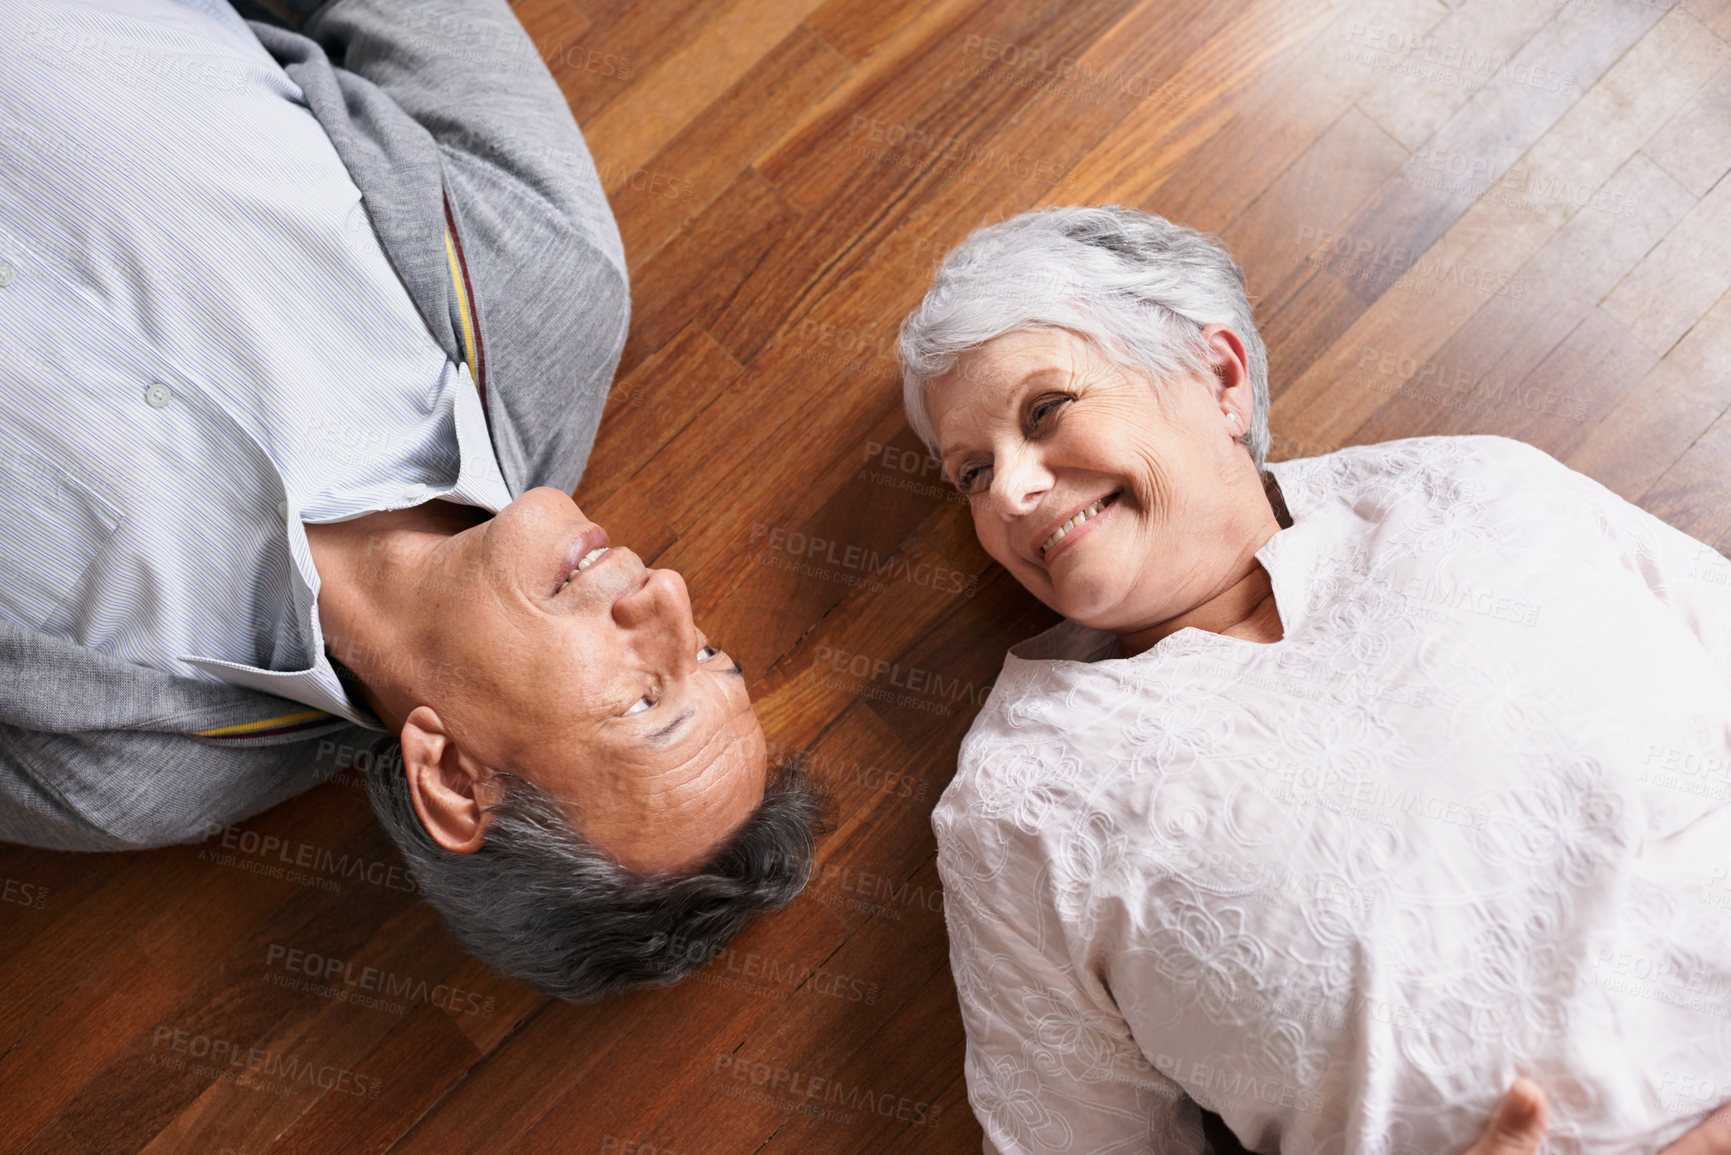 Buy stock photo Smile, senior or happy couple on floor to relax in home living room for bonding or support in retirement. Above, old people or man lying down by an elderly woman for trust, peace or care in marriage